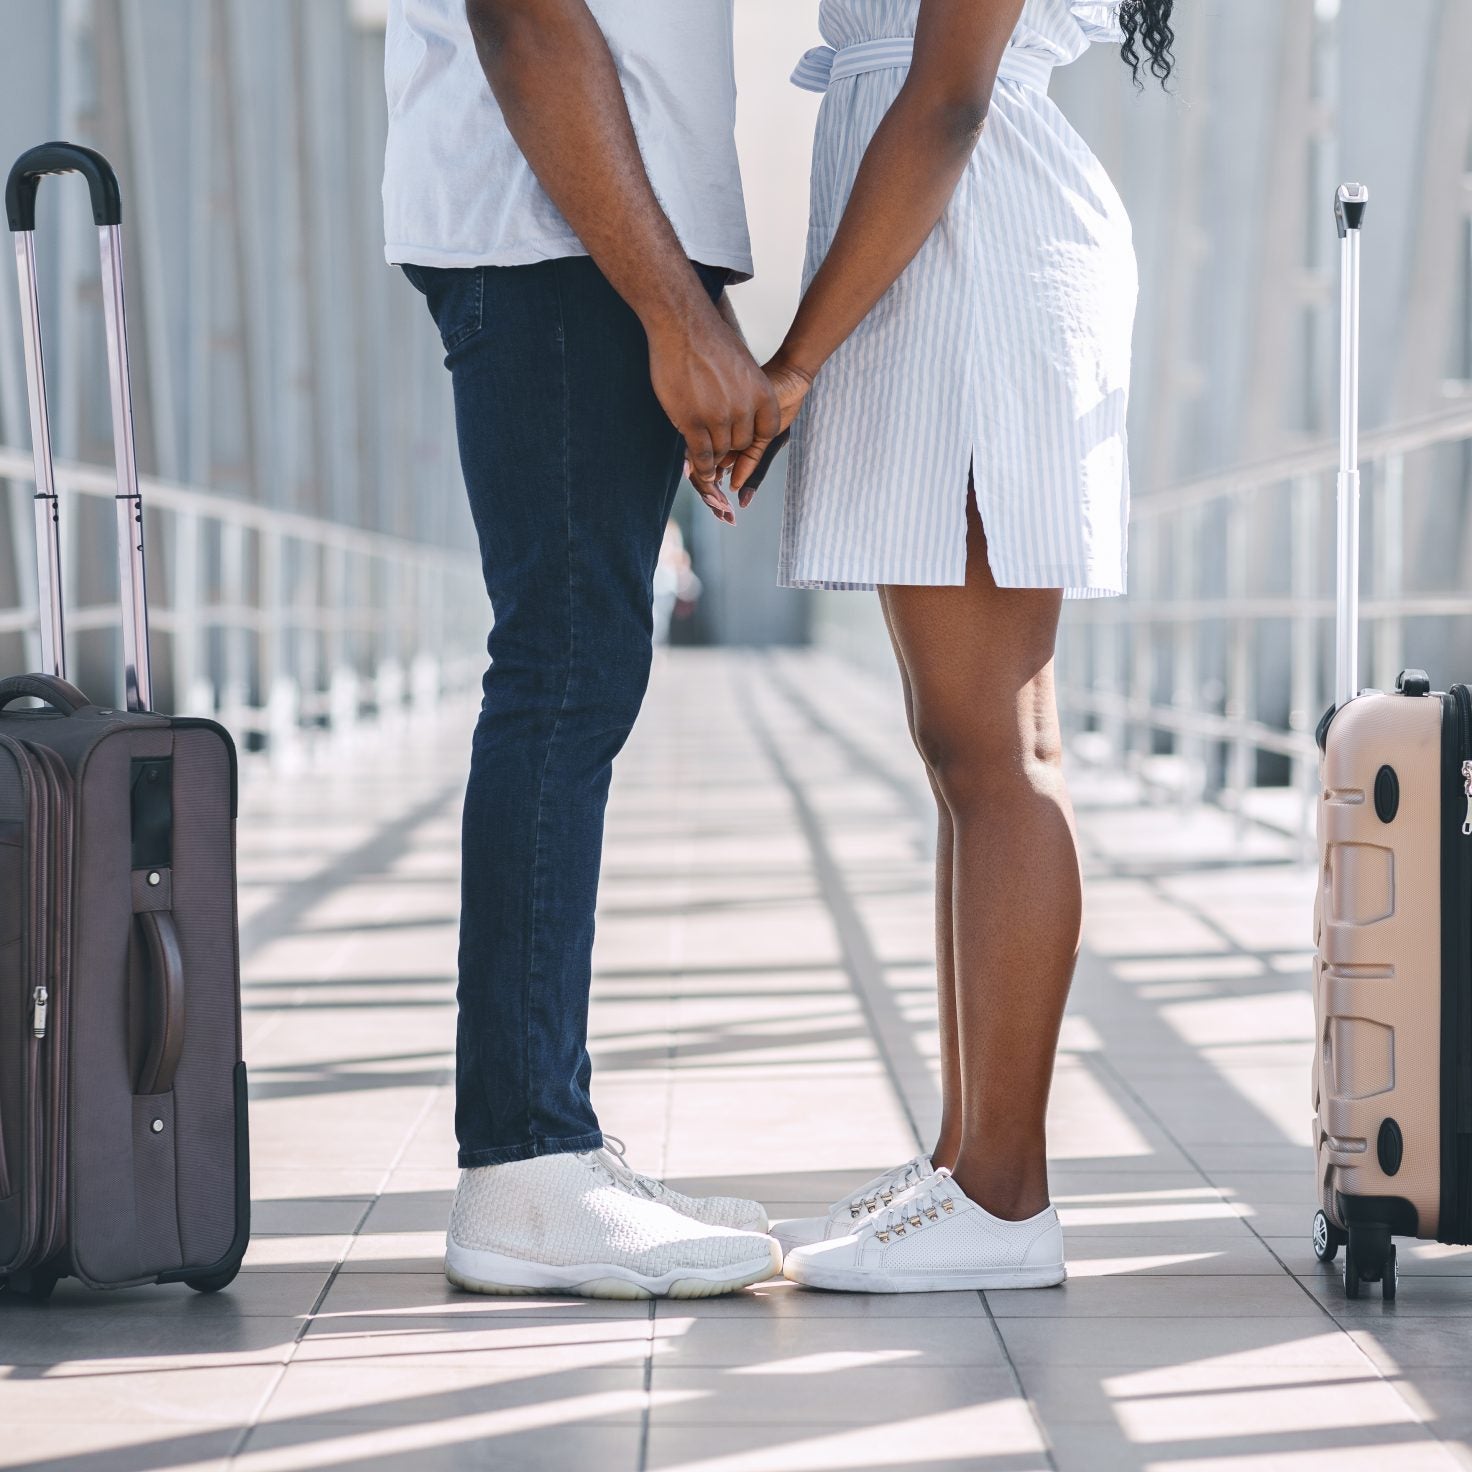 The Solve: How Can I Make Long Distance Love Work?